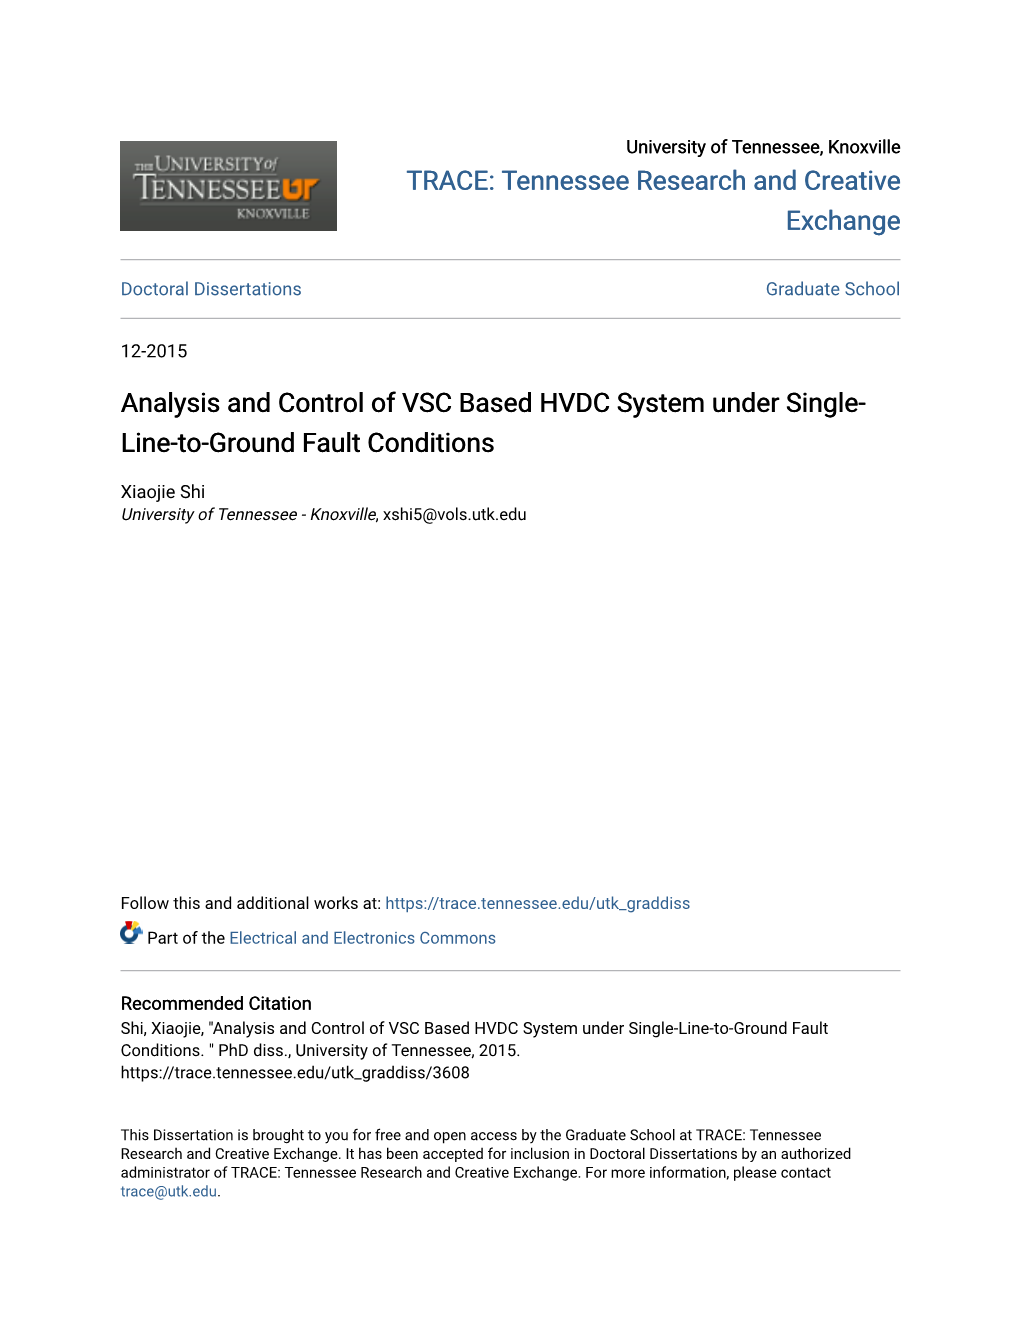 Analysis and Control of VSC Based HVDC System Under Single-Line-To-Ground Fault Conditions